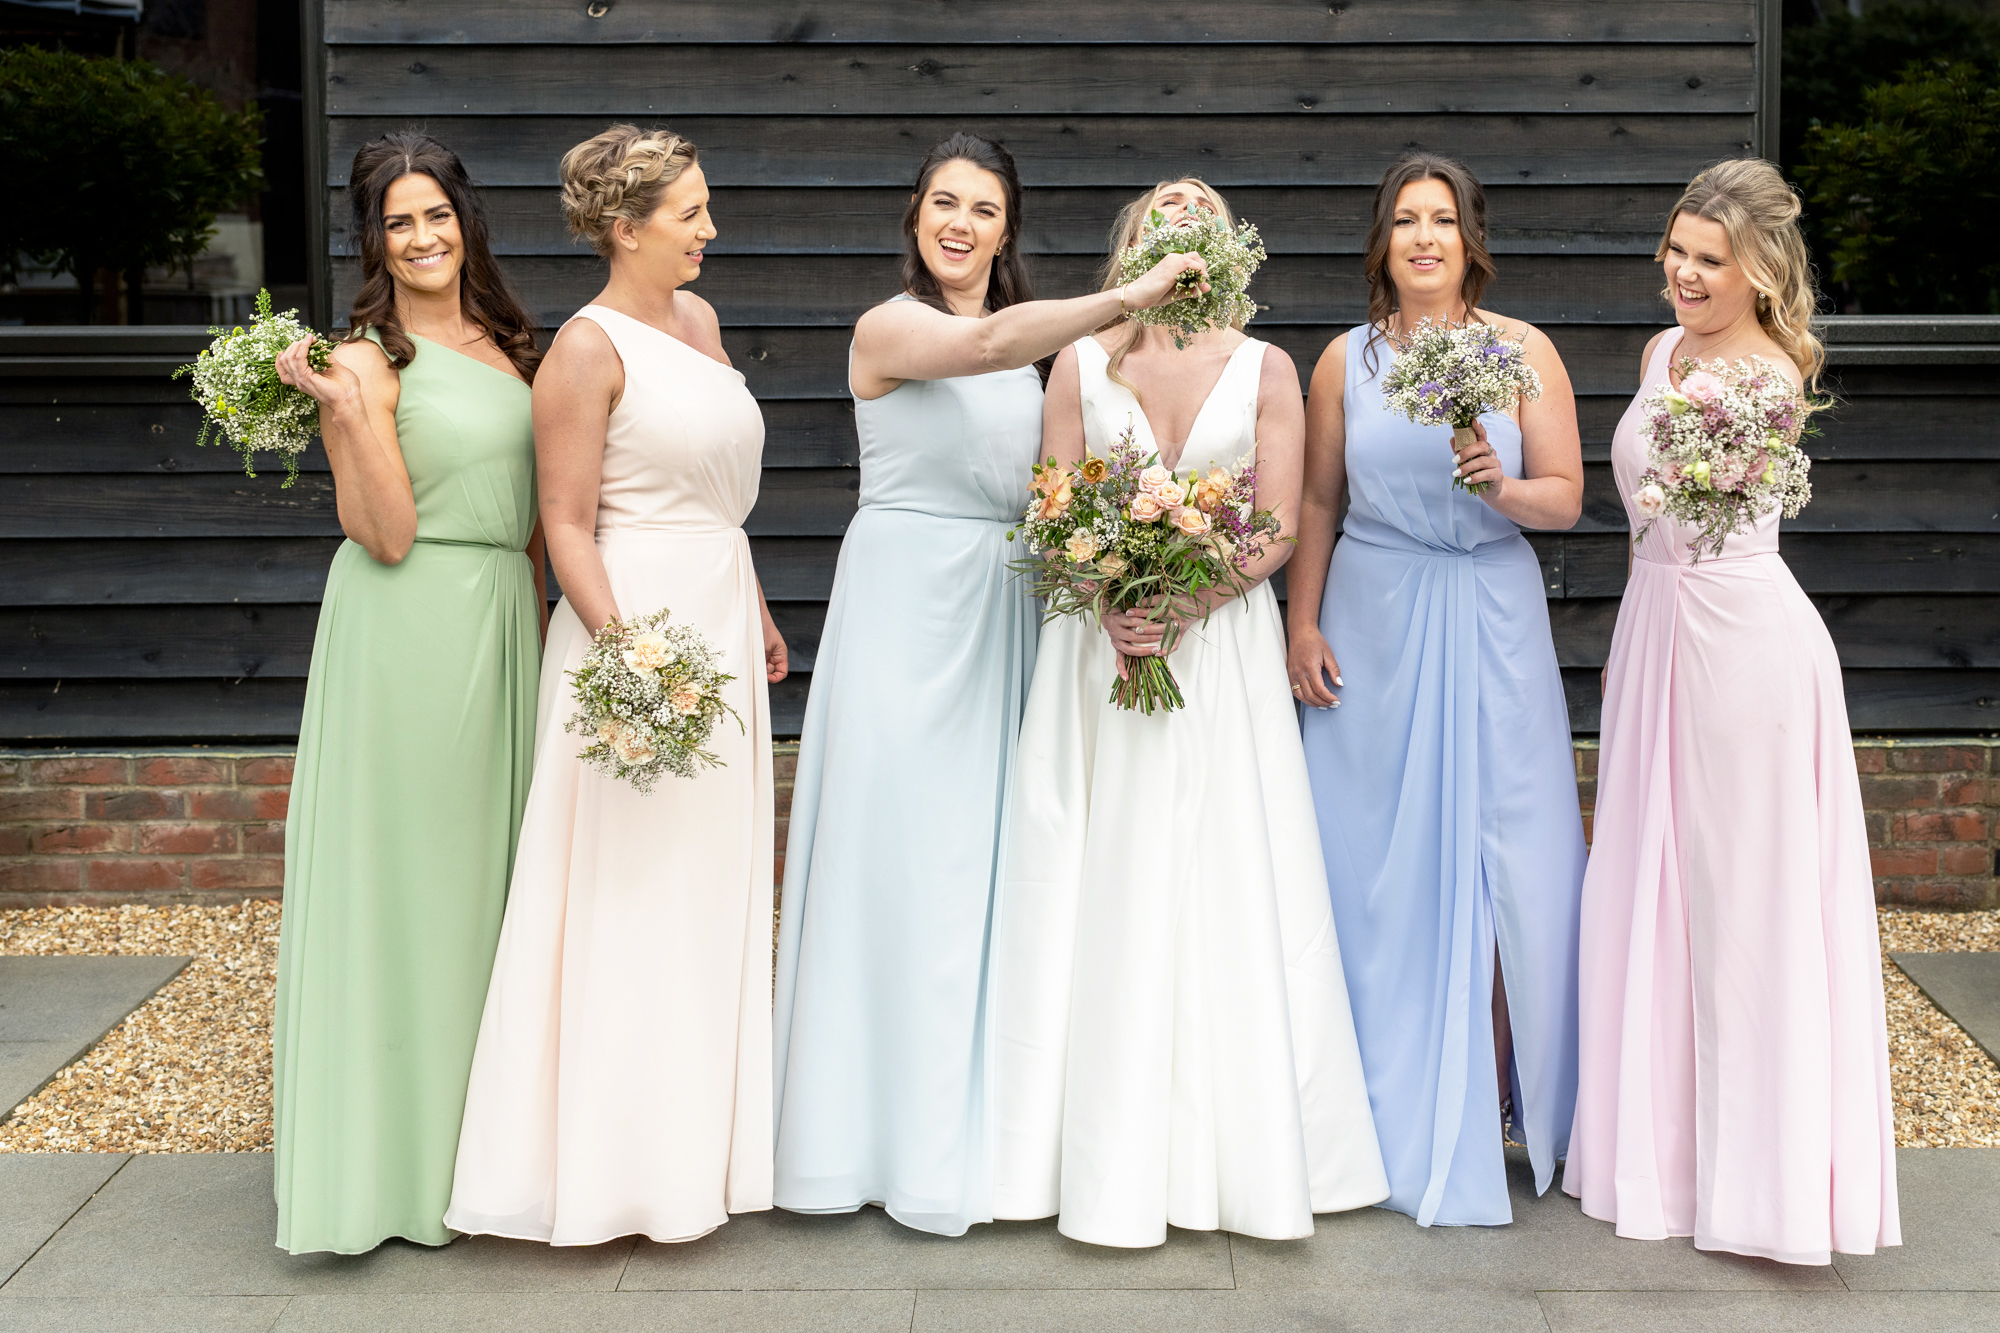 A bride in a white dress stands with five bridesmaids, who are wearing dresses in pastel colors, in front of a dark wooden wall at Milling Barn, hertfordshire. One bridesmaid playfully holds a bouquet of flowers in front of the bride’s face, causing both to laugh.